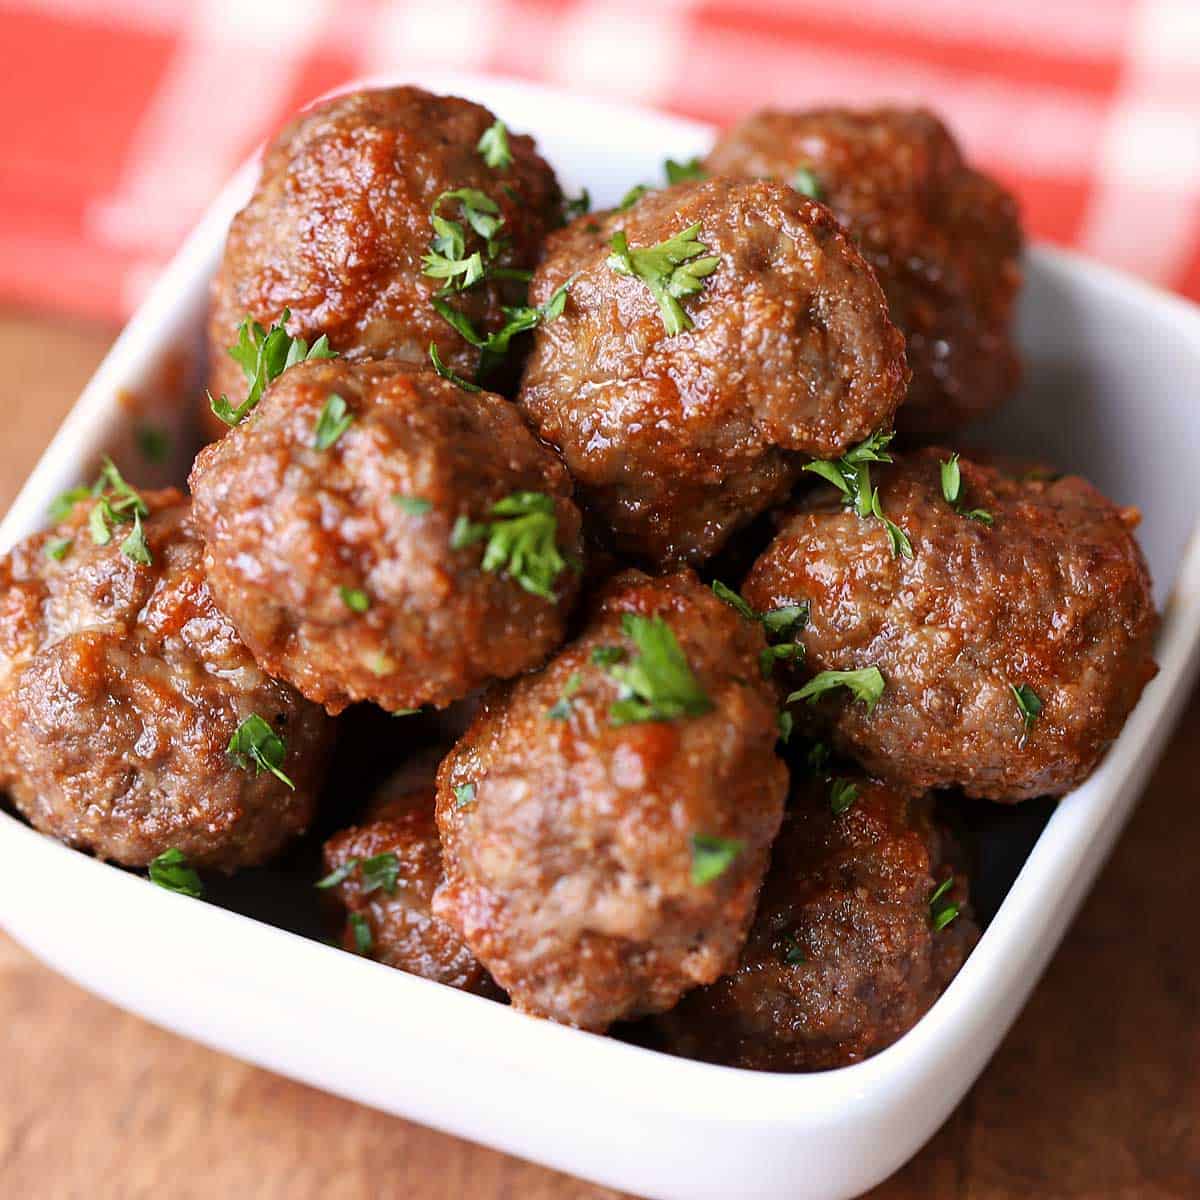 Meatballs without Breadcrumbs.